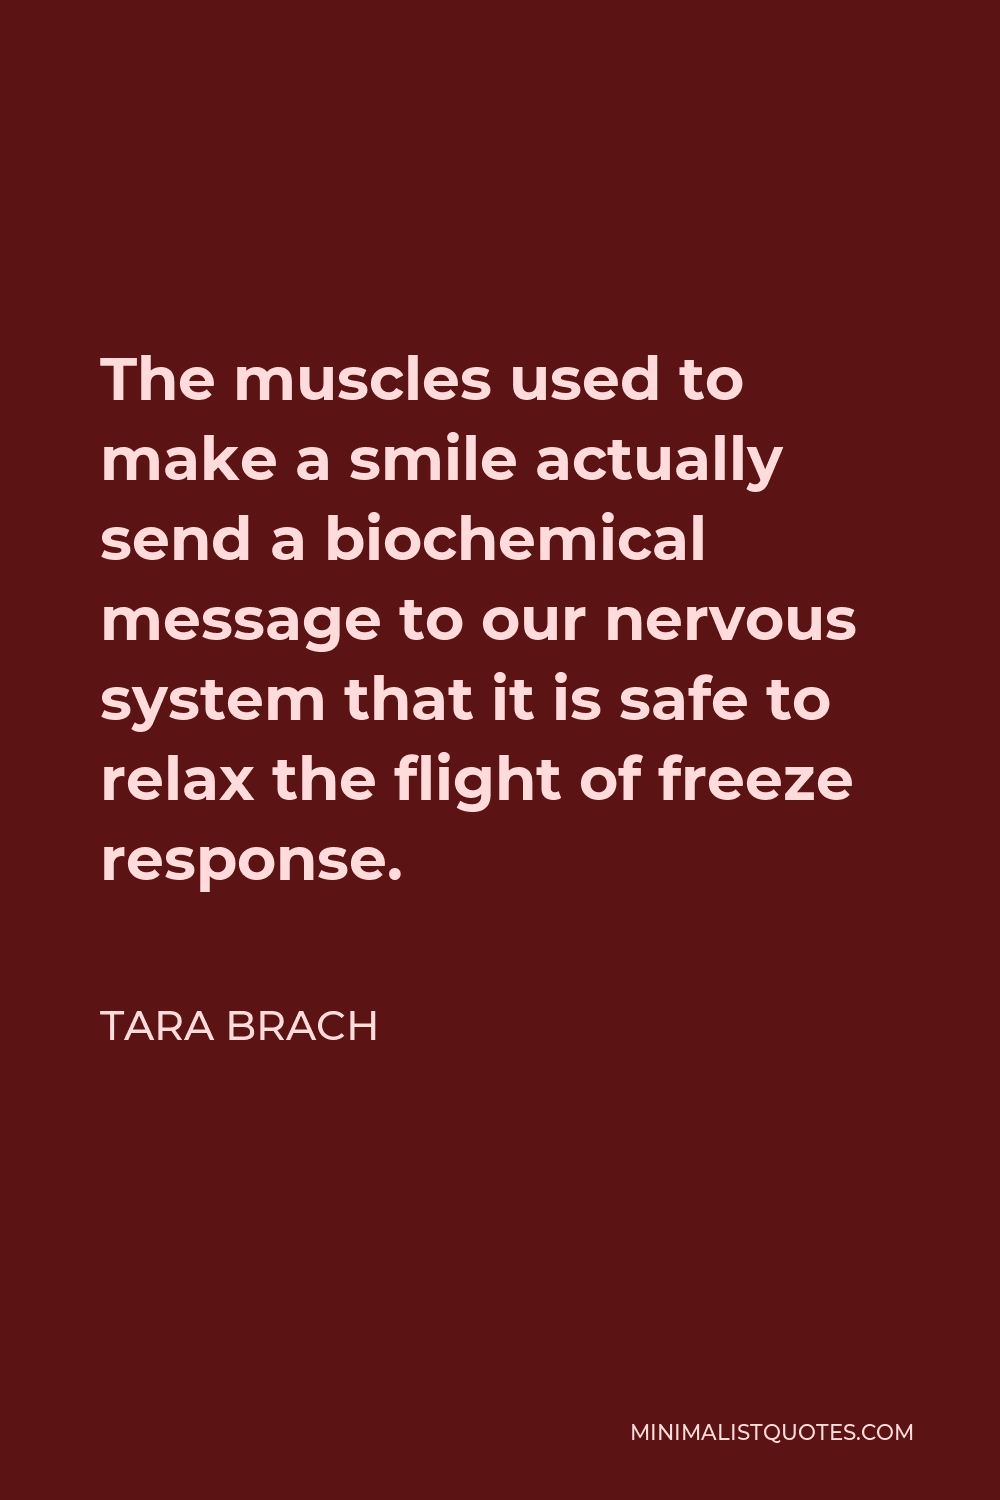 Tara Brach Quote - The muscles used to make a smile actually send a biochemical message to our nervous system that it is safe to relax the flight of freeze response.